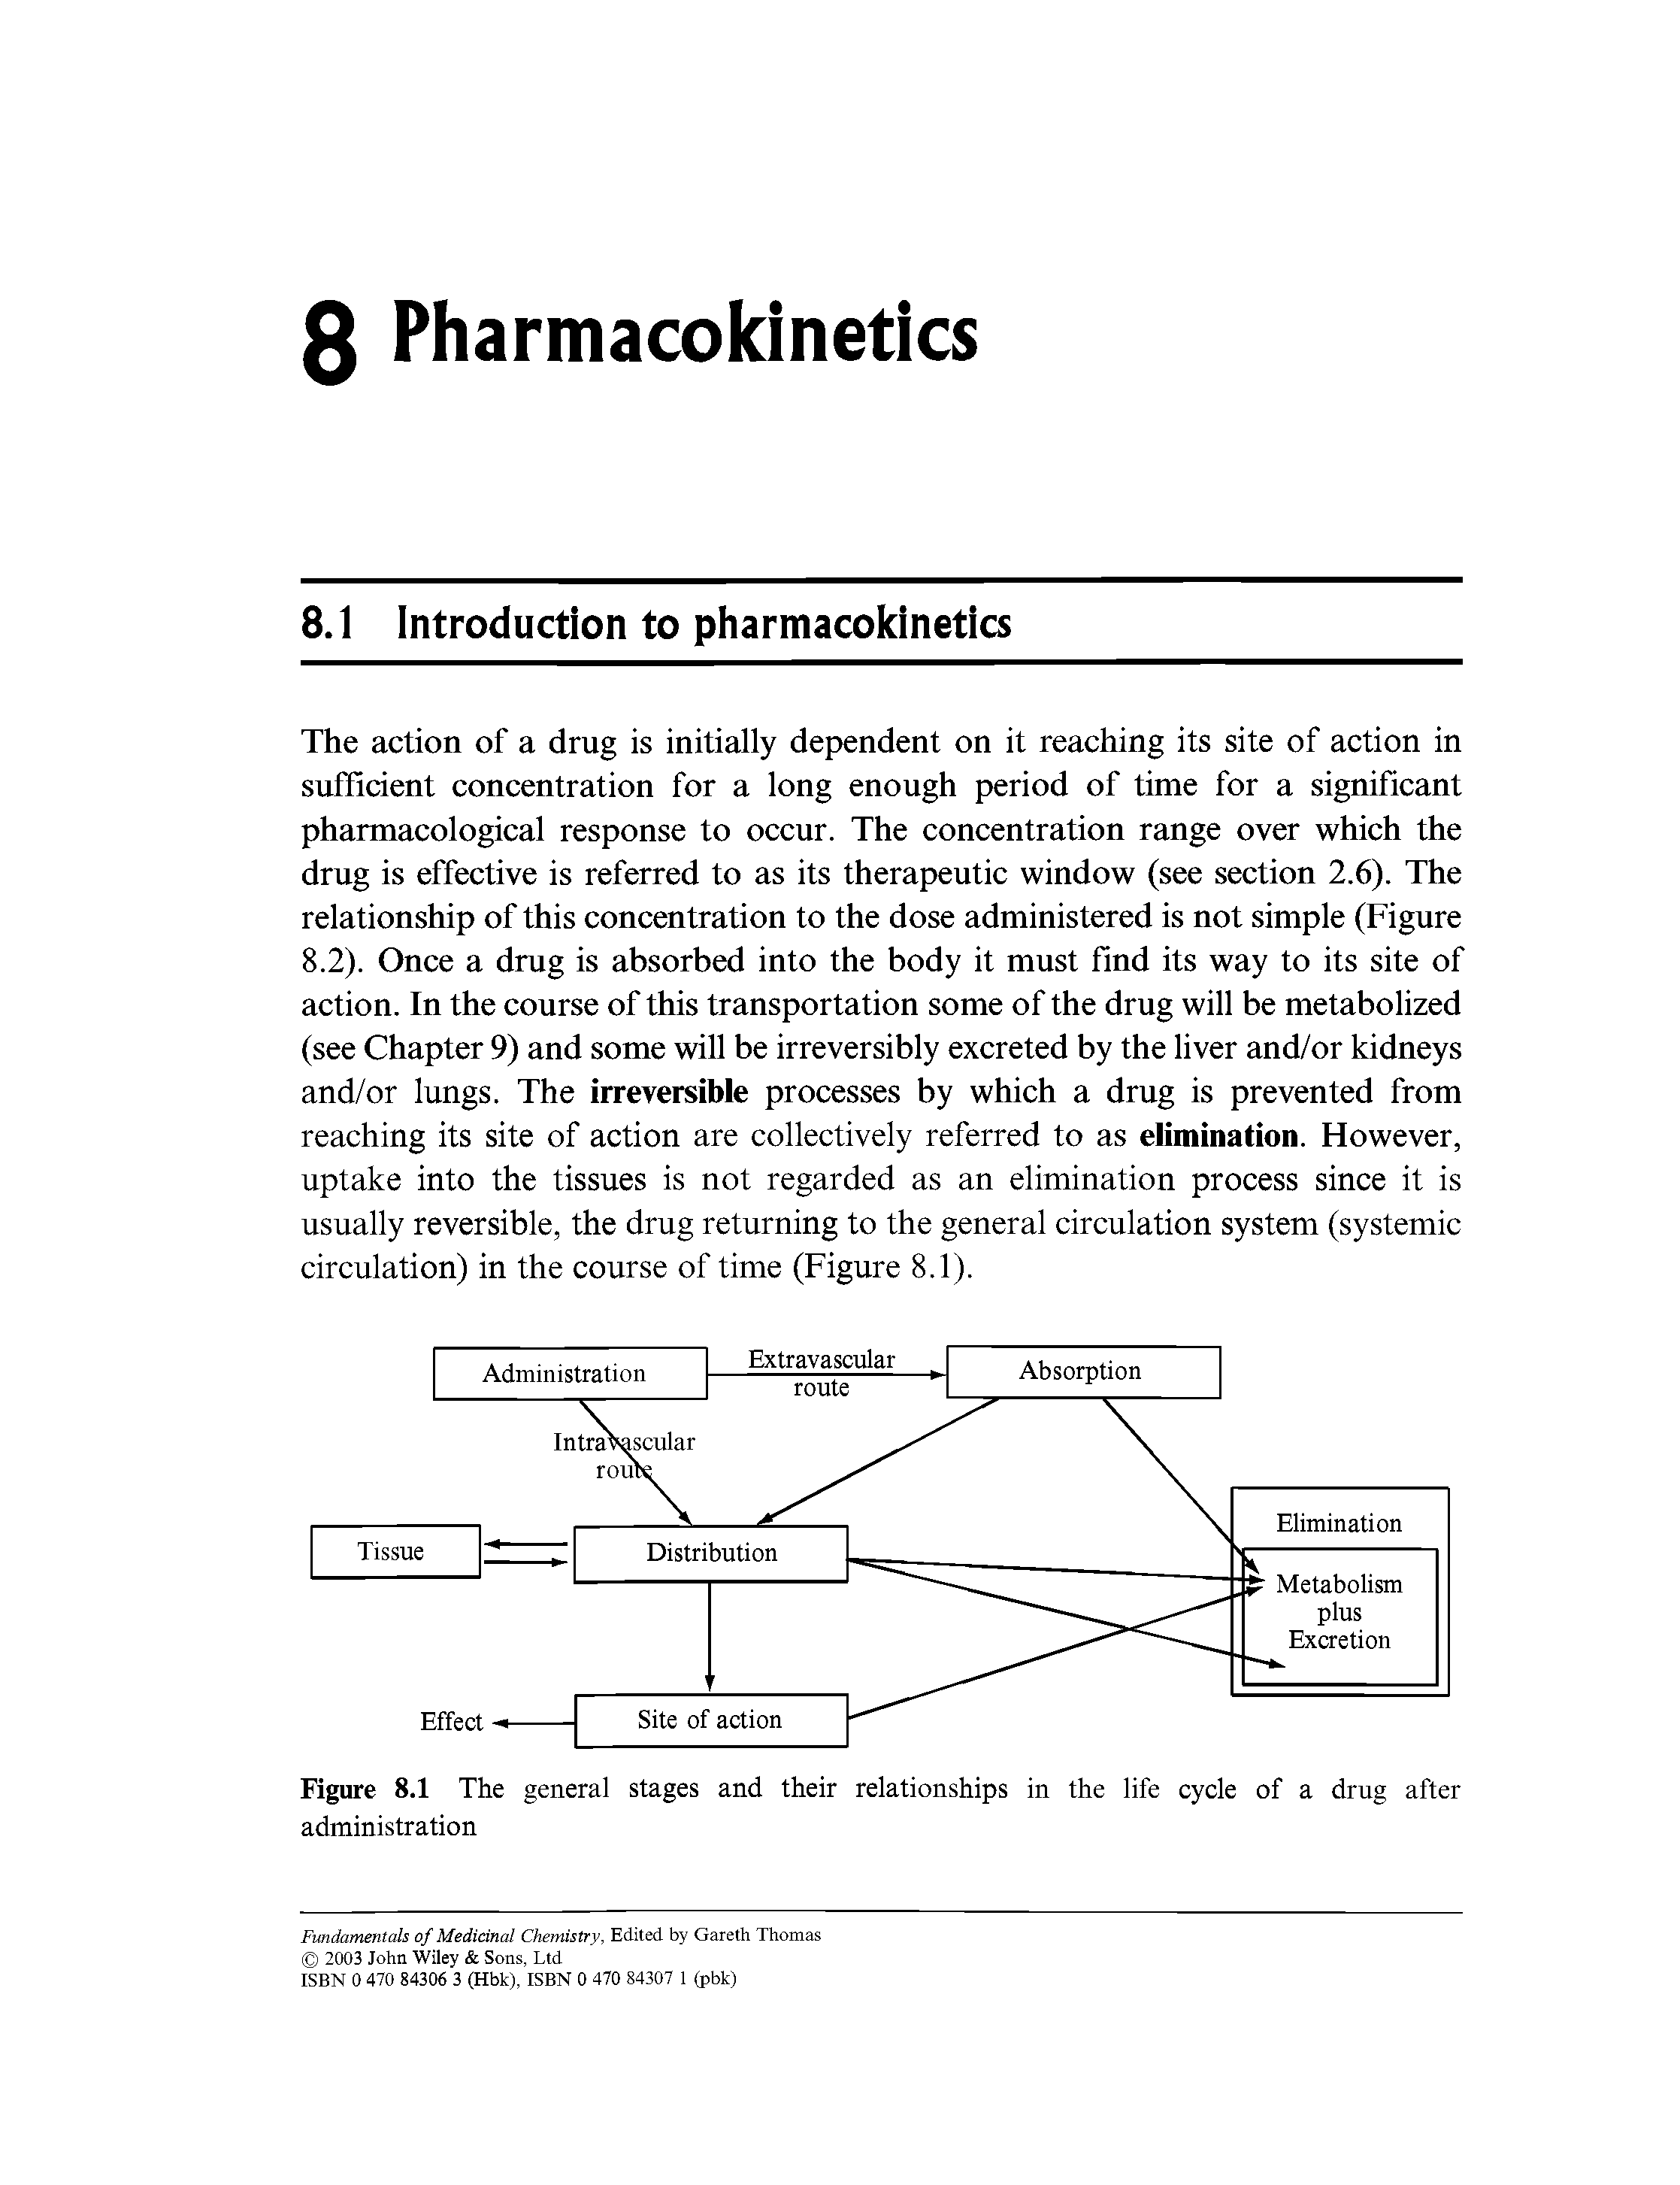 Figure 8.1 The general stages and their relationships in the life cycle of a drug after administration...